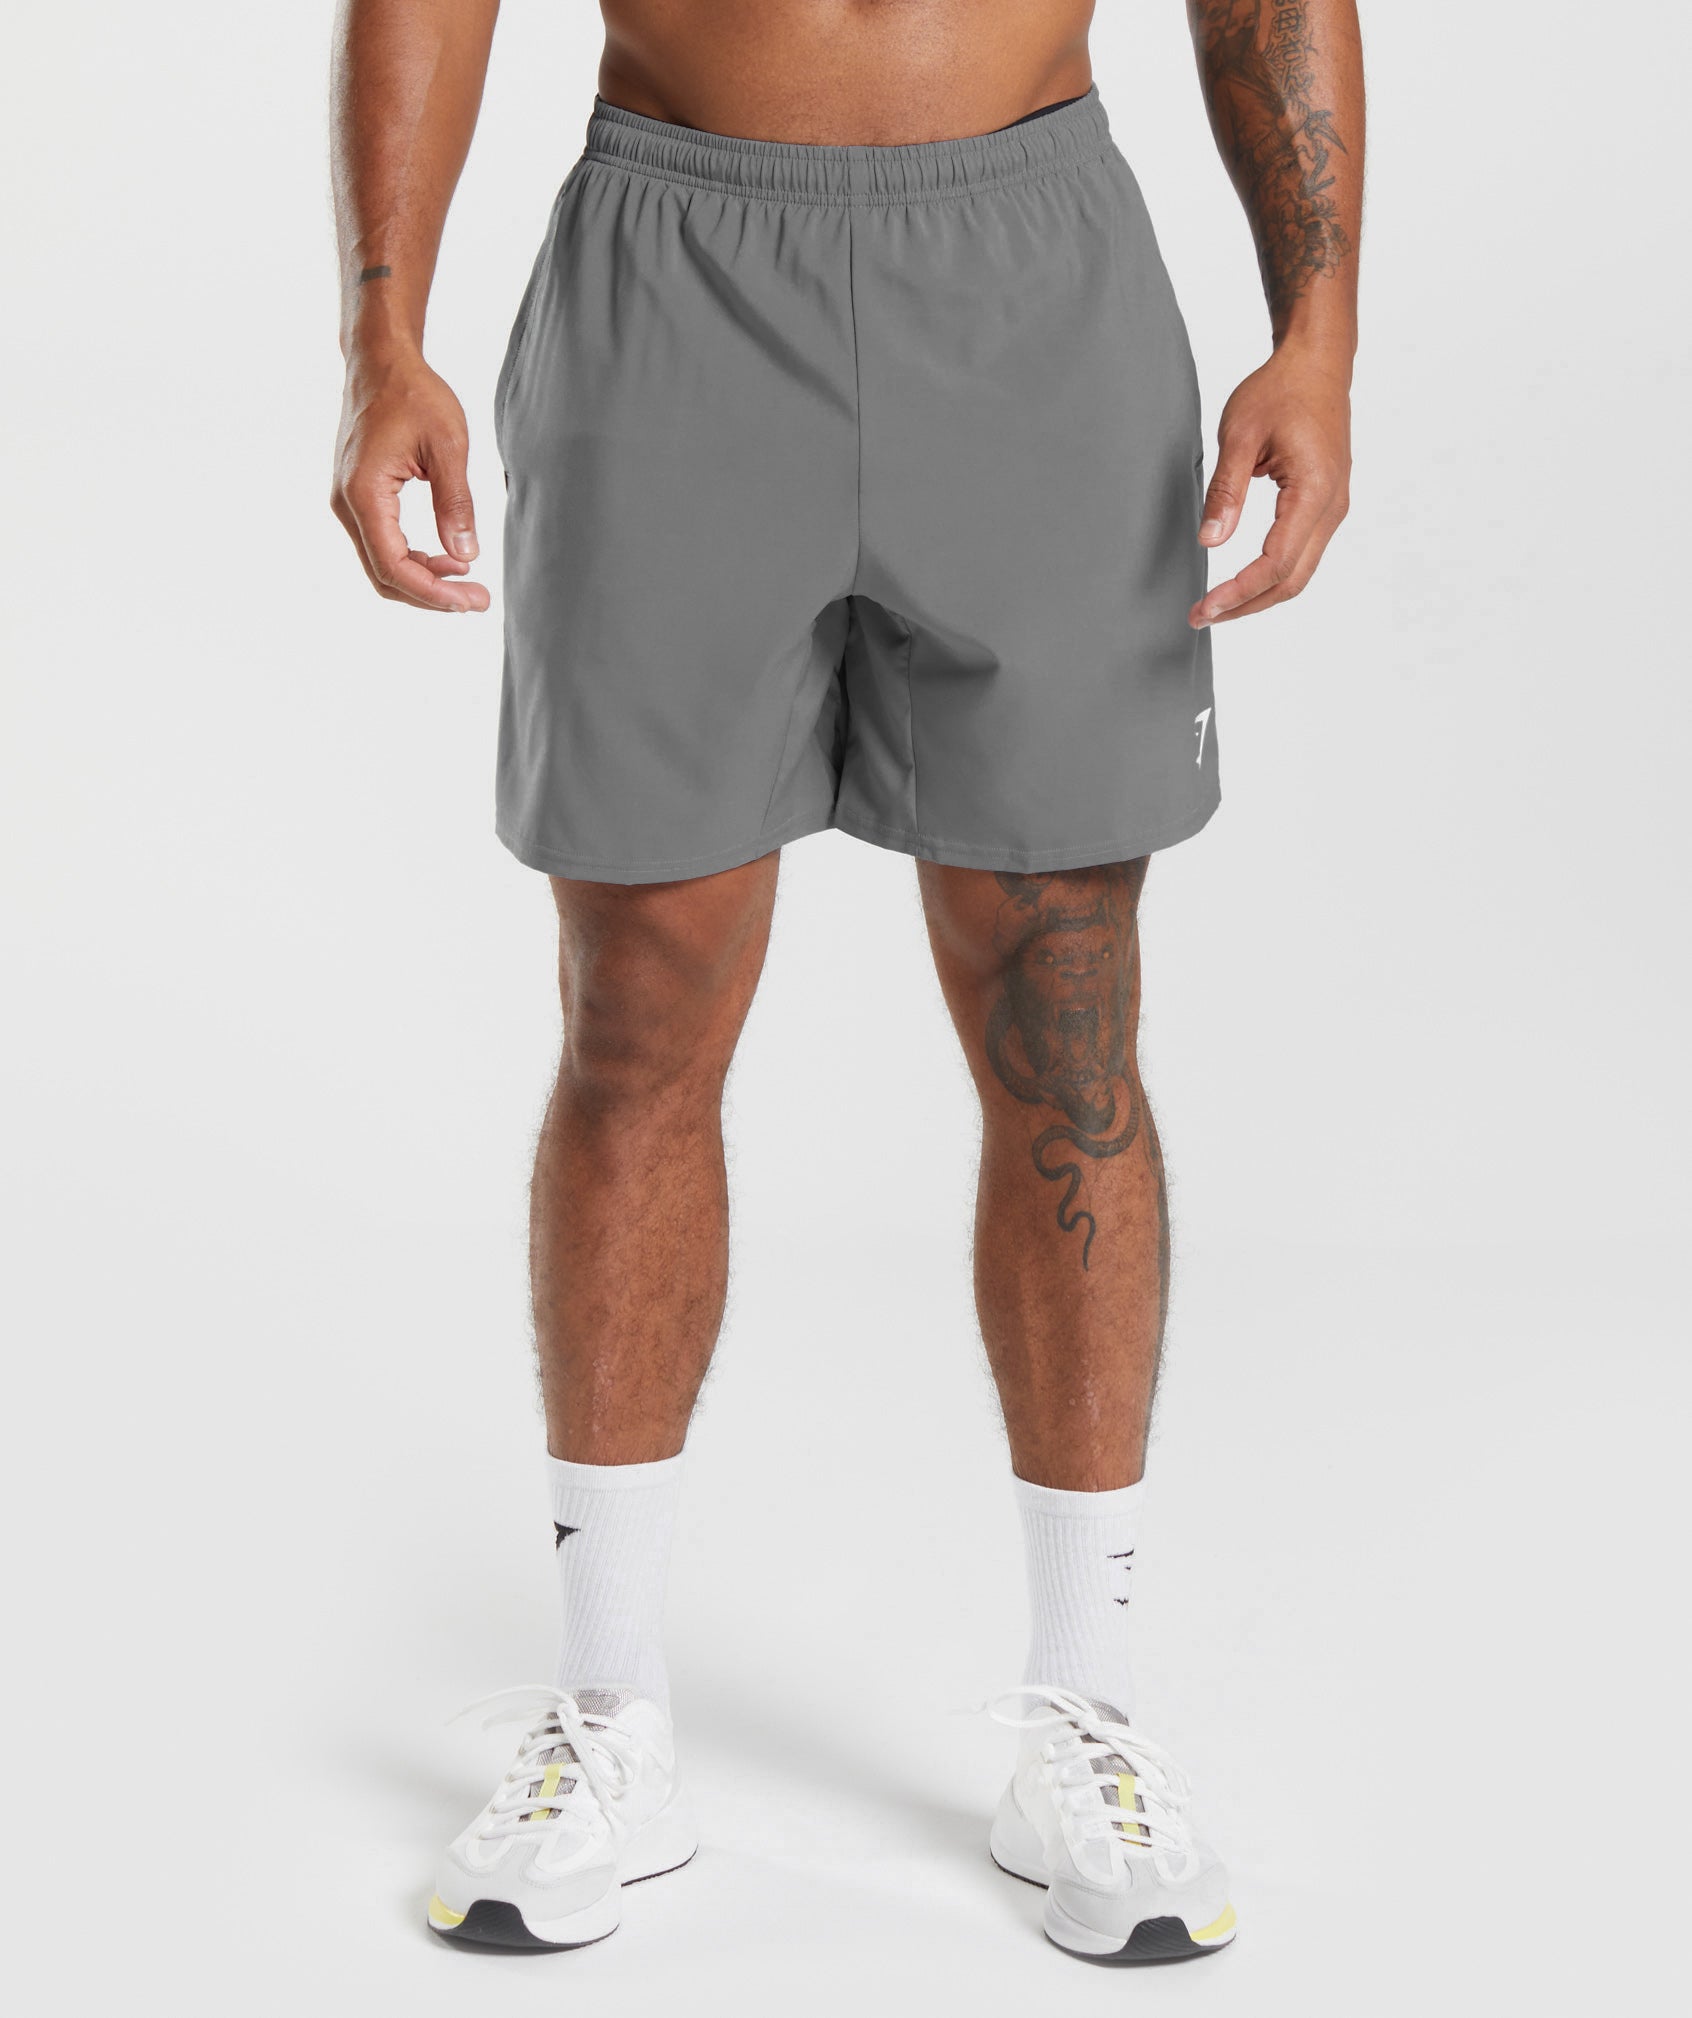 Arrival 7" Shorts in Charcoal Grey is out of stock